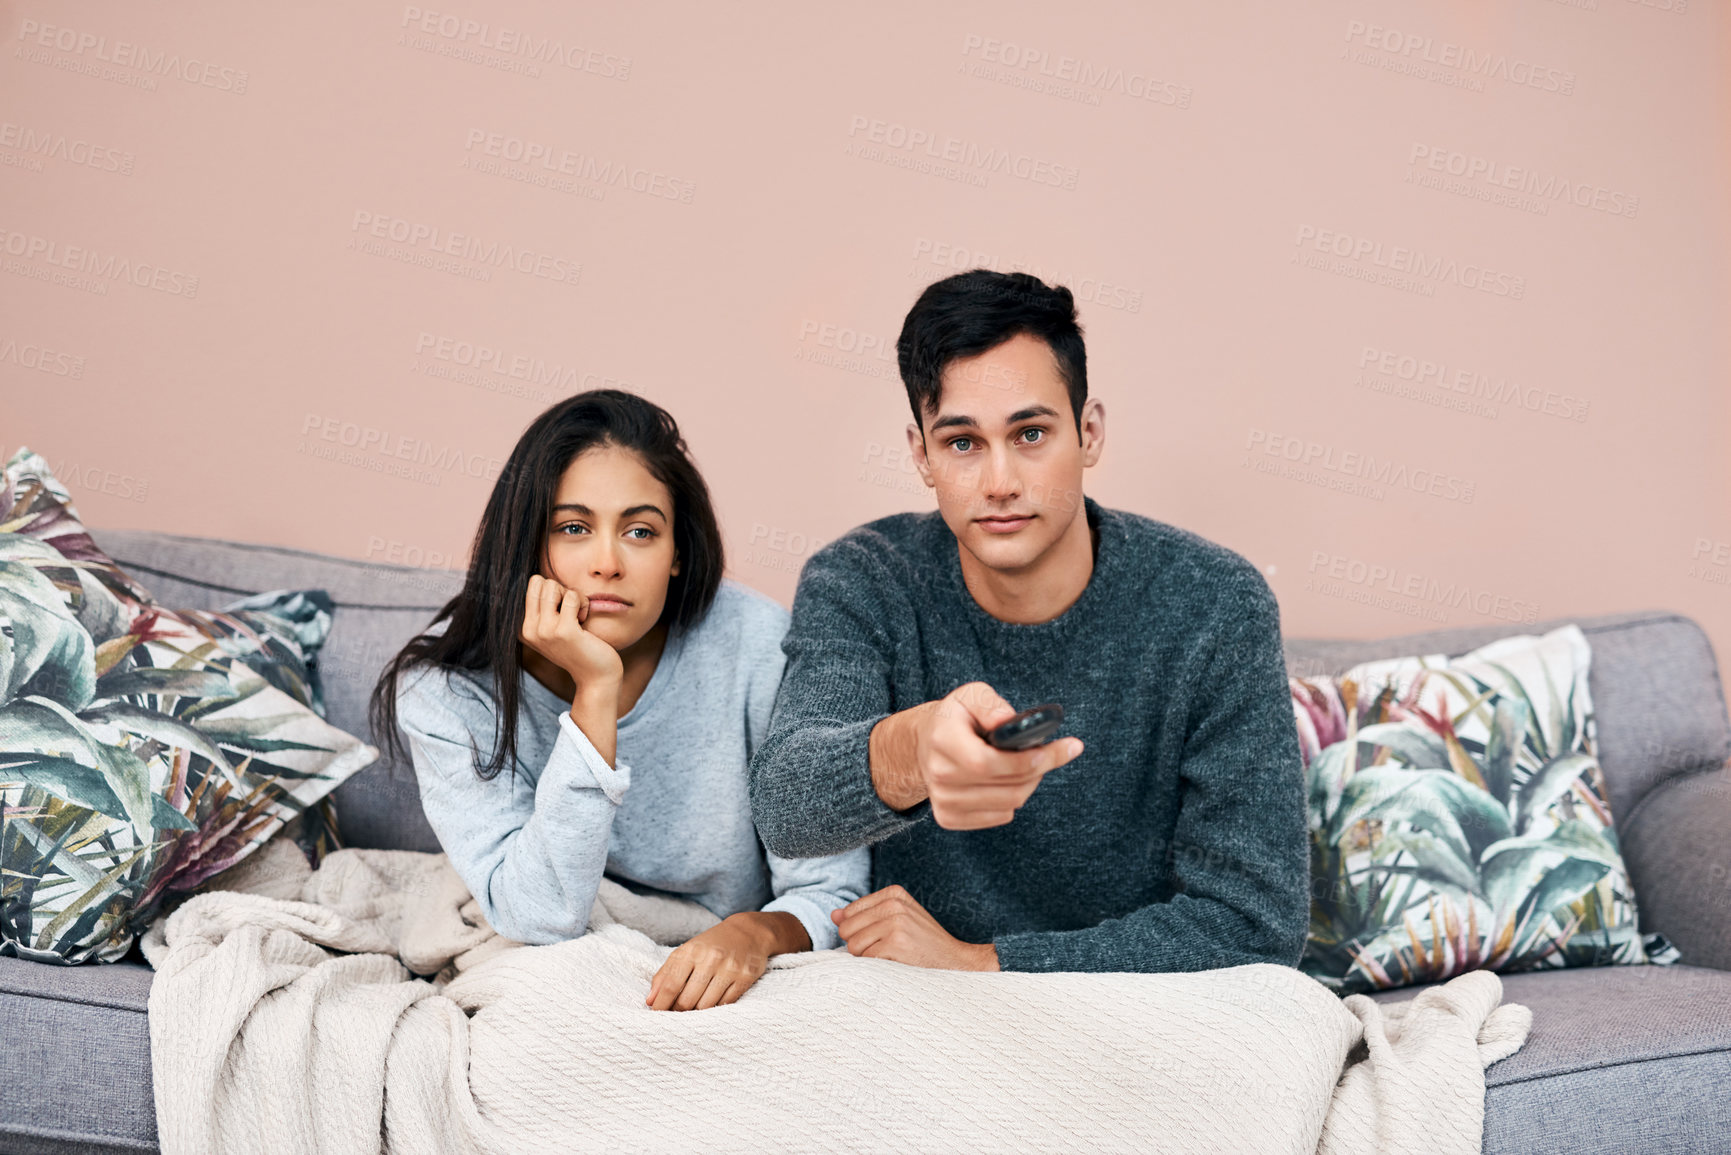 Buy stock photo Shot of a young couple watching tv while recovering from an illness at home